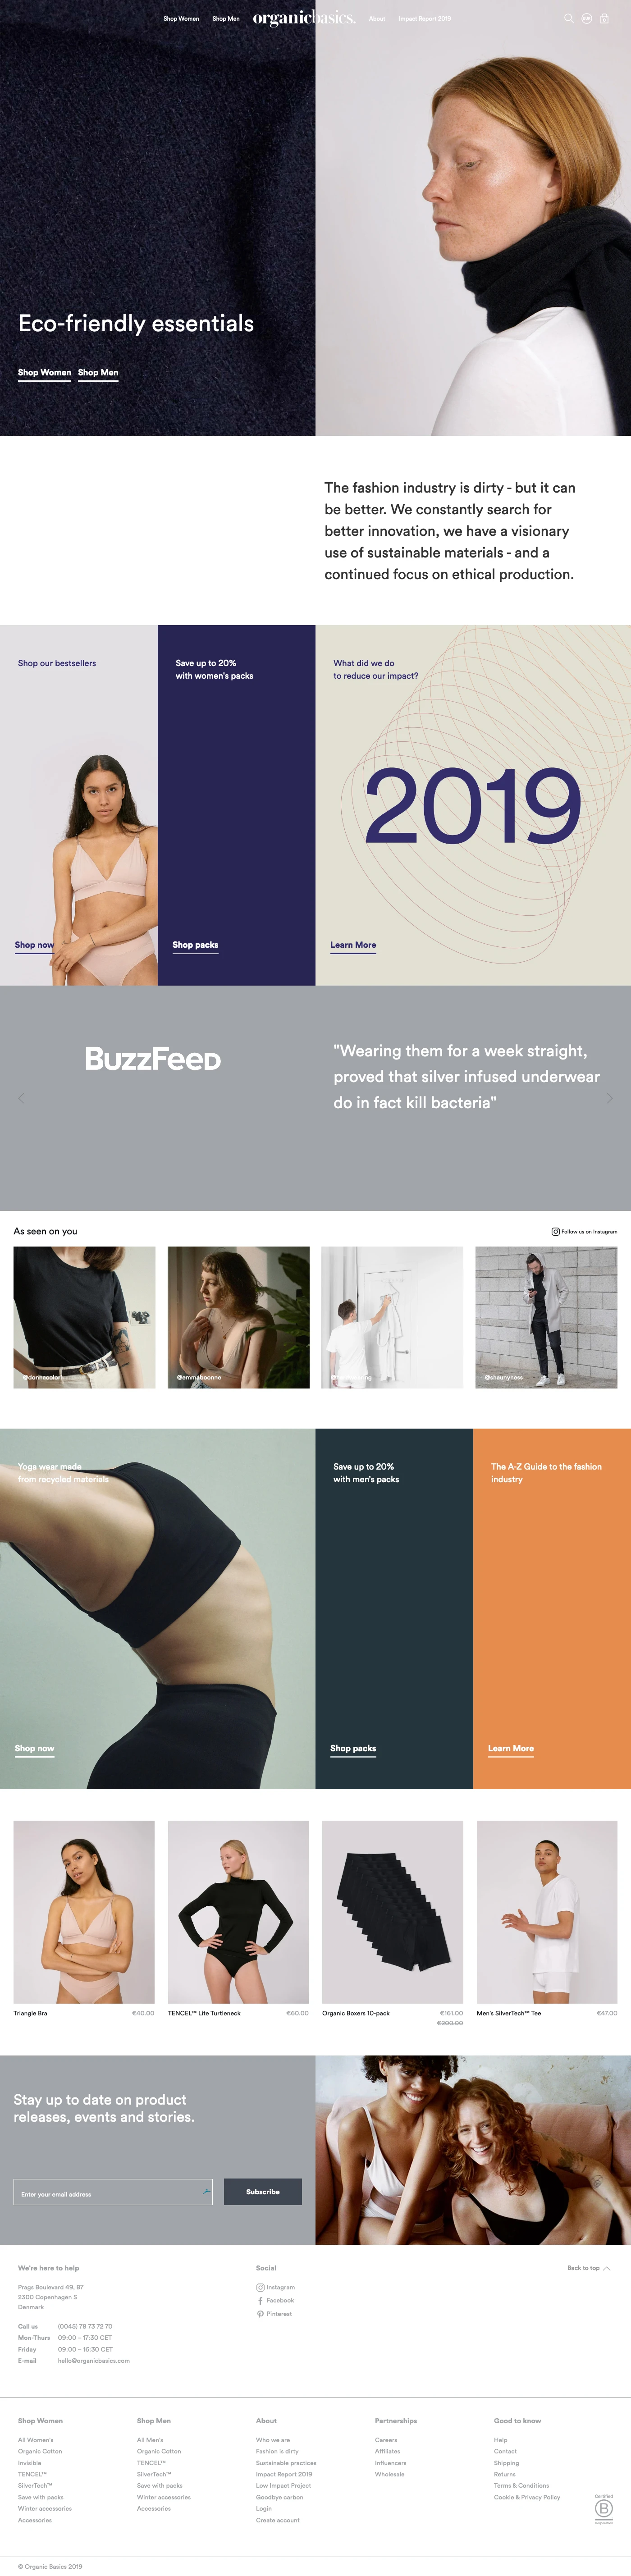 Organic Basics Landing Page Example: Underwear, activewear and essentials made ethically in Europe.